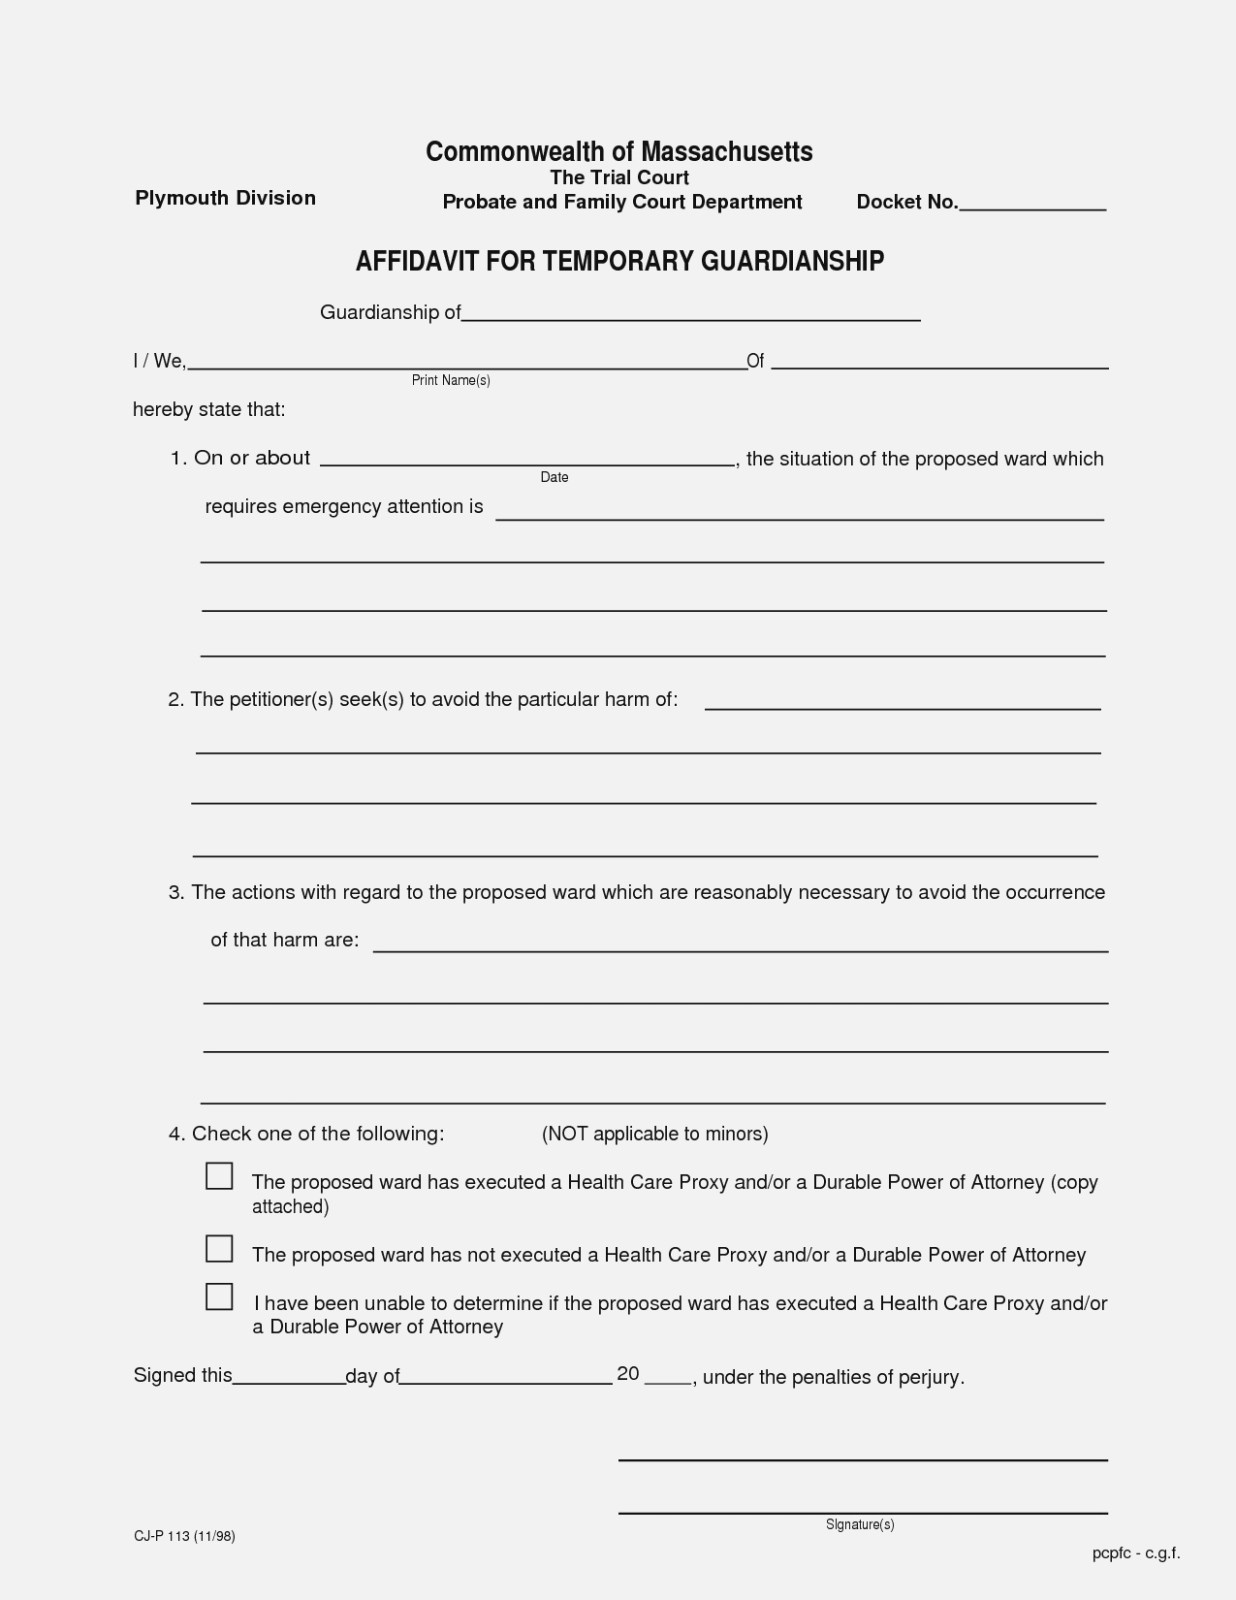 Ten Things You Probably | Realty Executives Mi : Invoice And Resume - Free Printable Temporary Guardianship Form